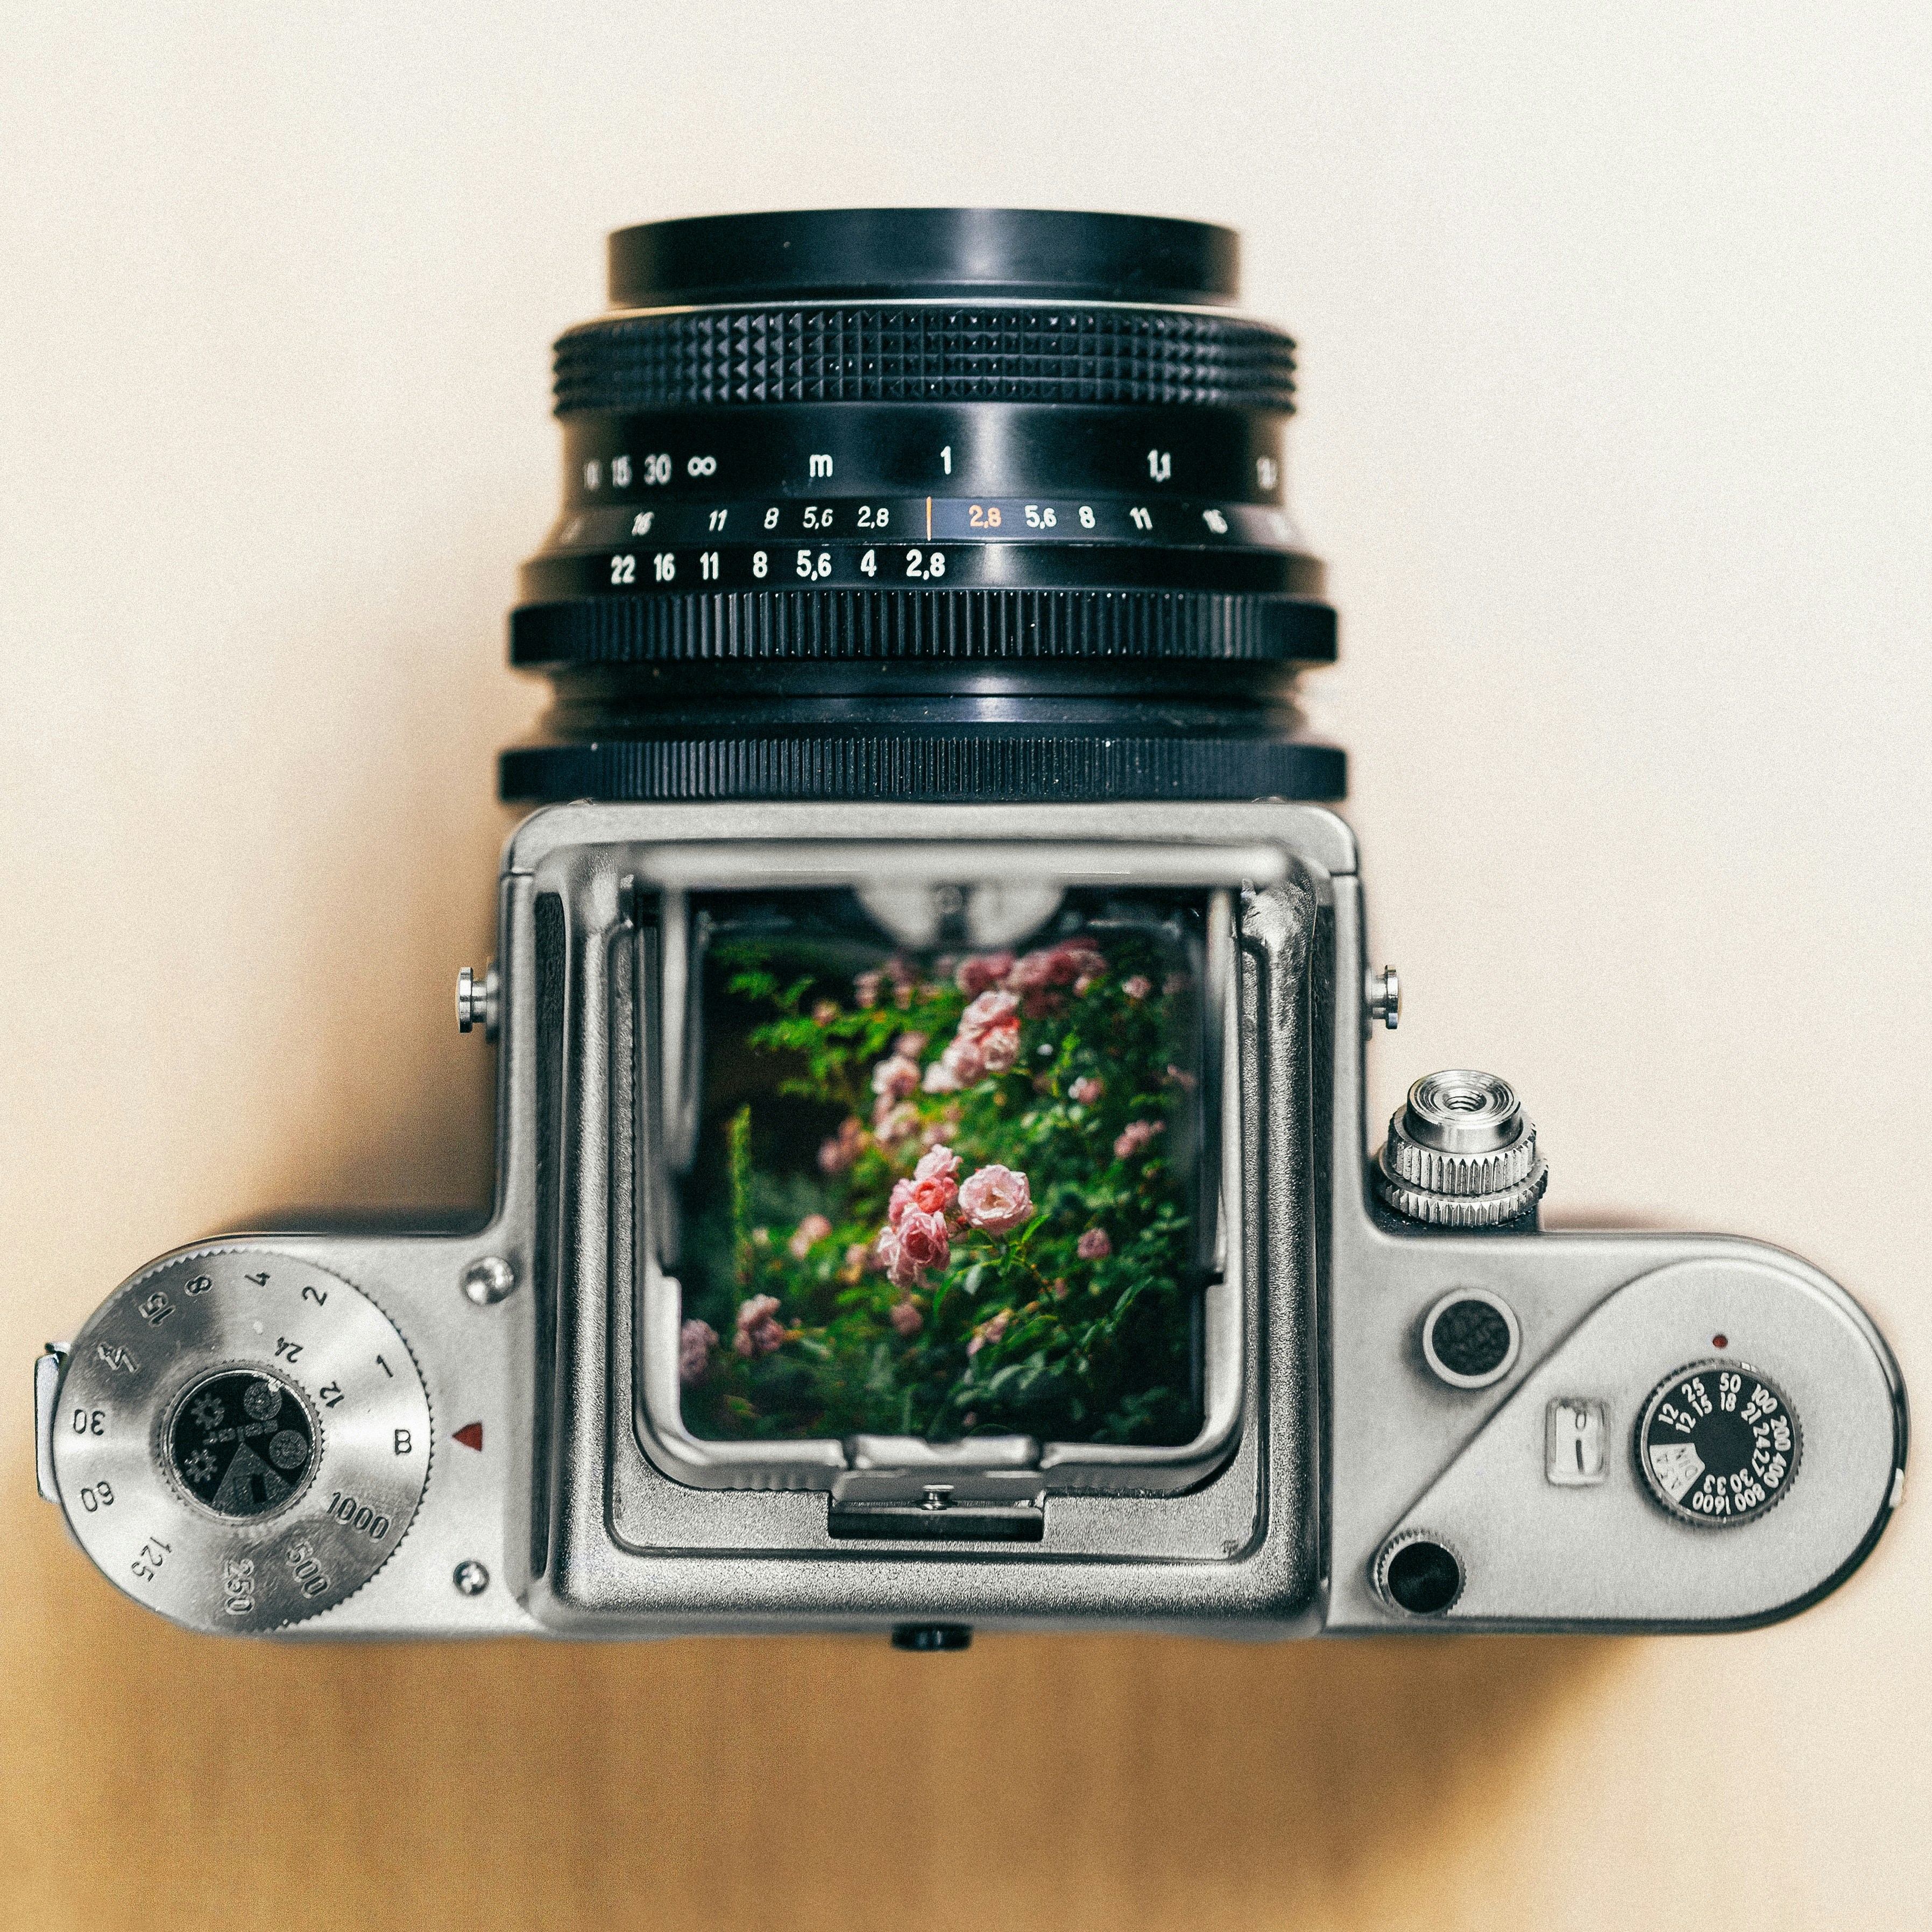 Flowers in the Viewfinder